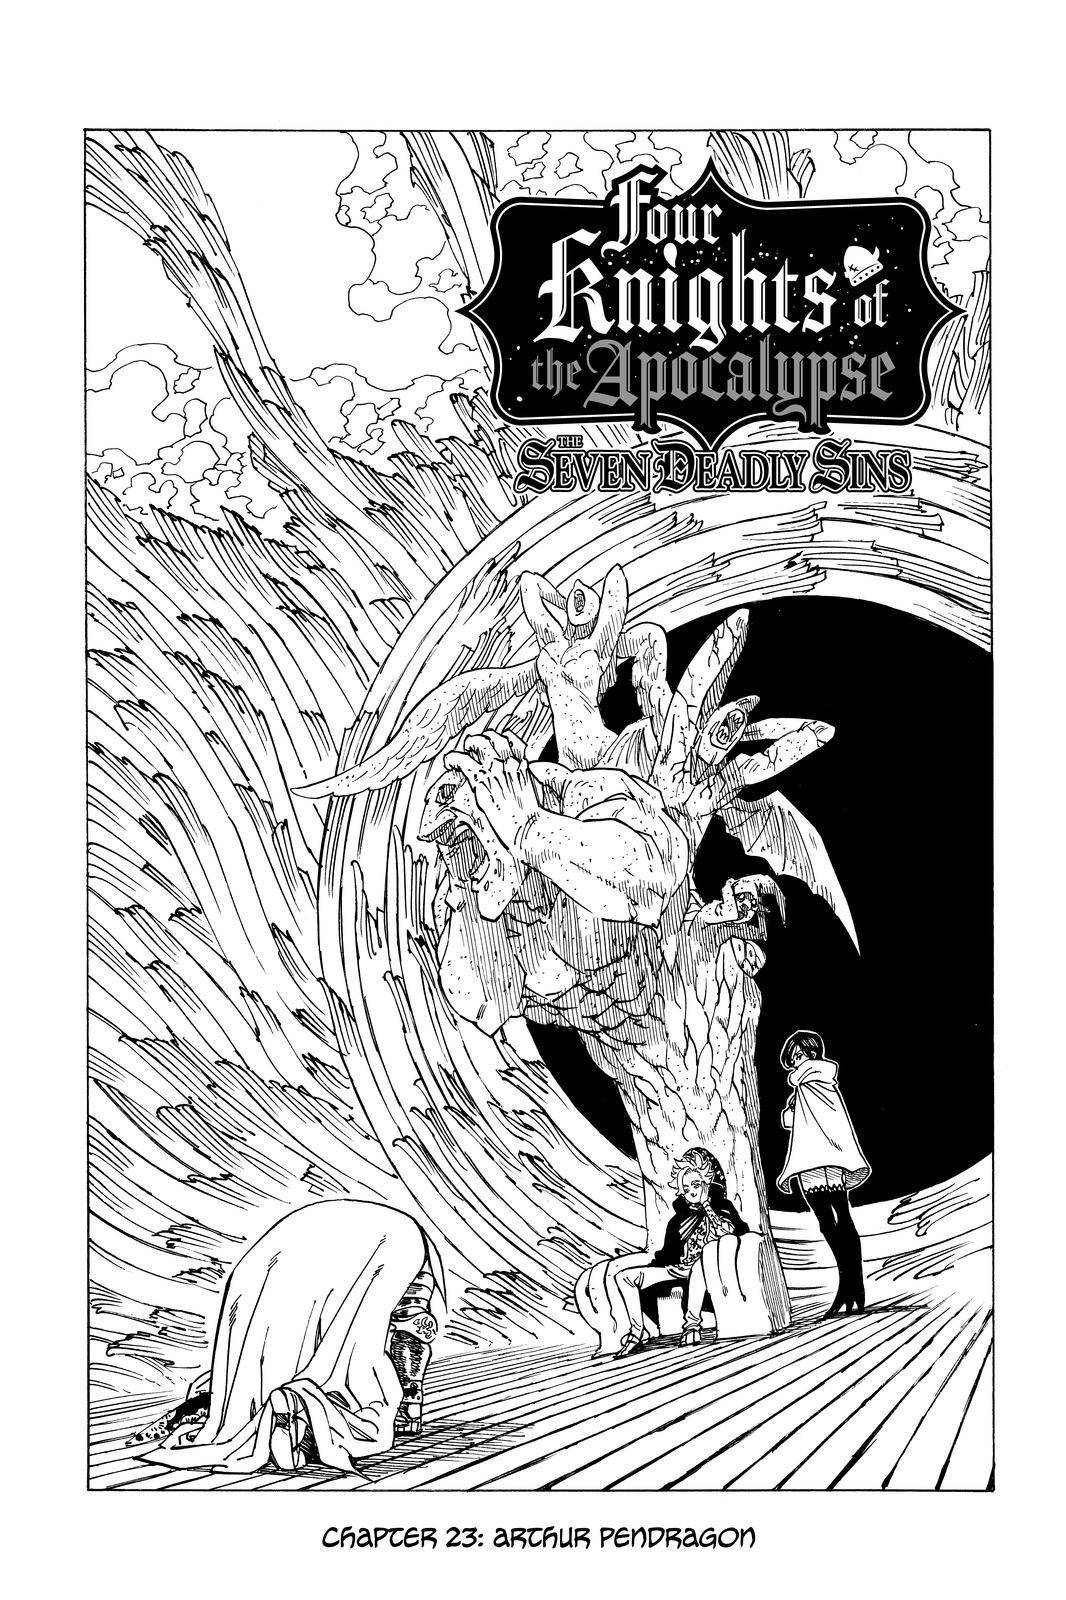 The Seven Deadly Sins: Four Knights of the Apocalypse Chapter 23